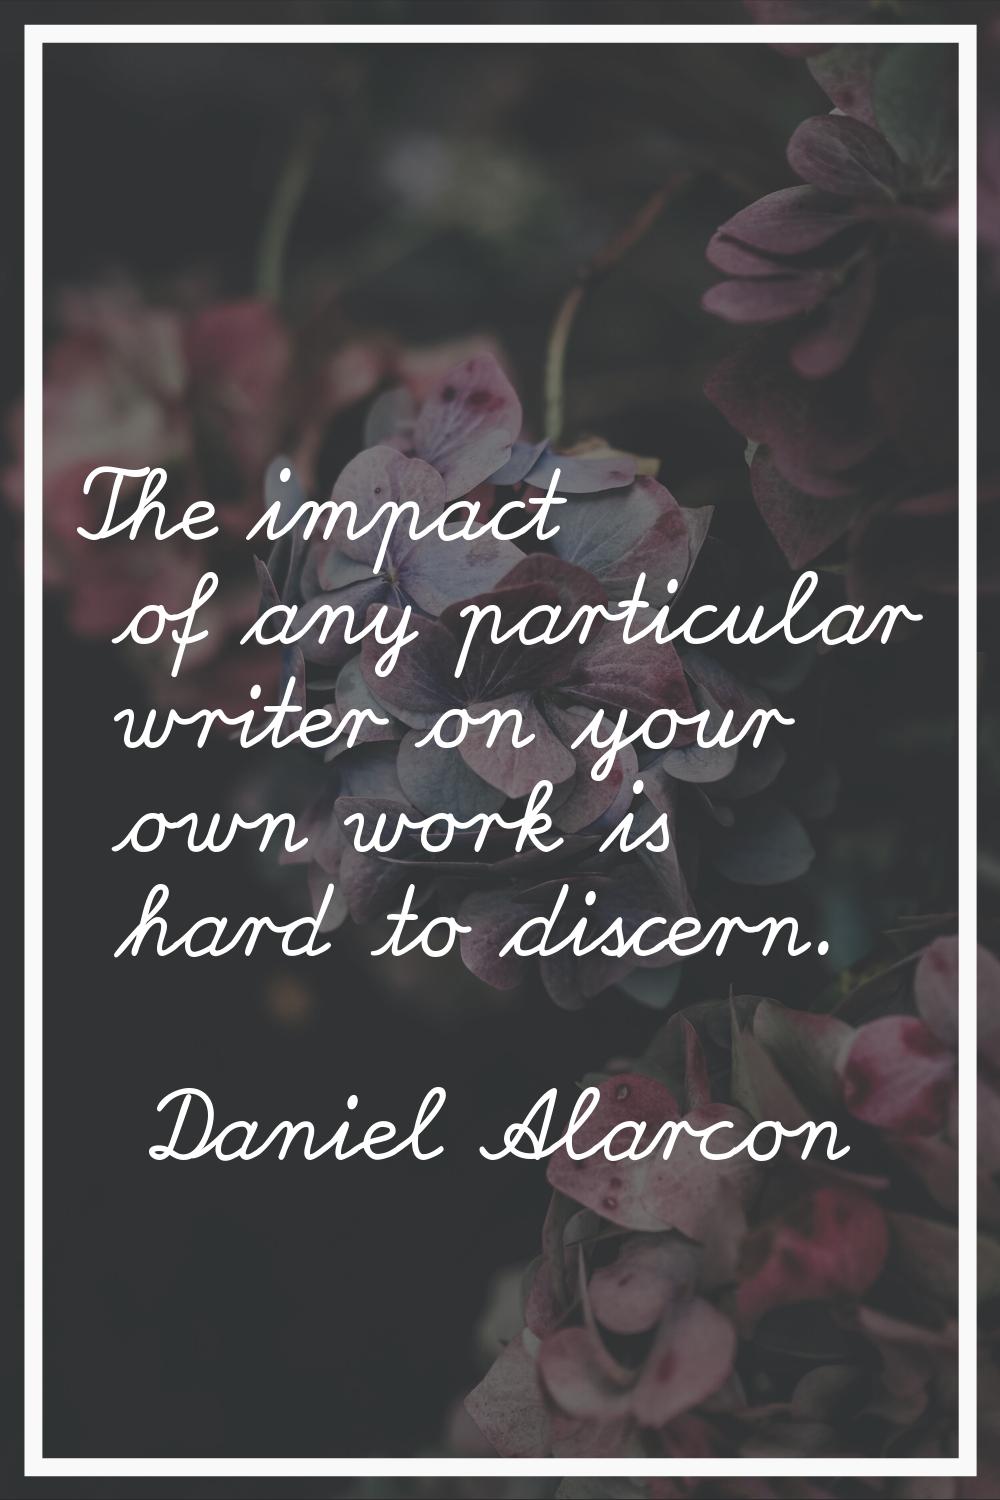 The impact of any particular writer on your own work is hard to discern.